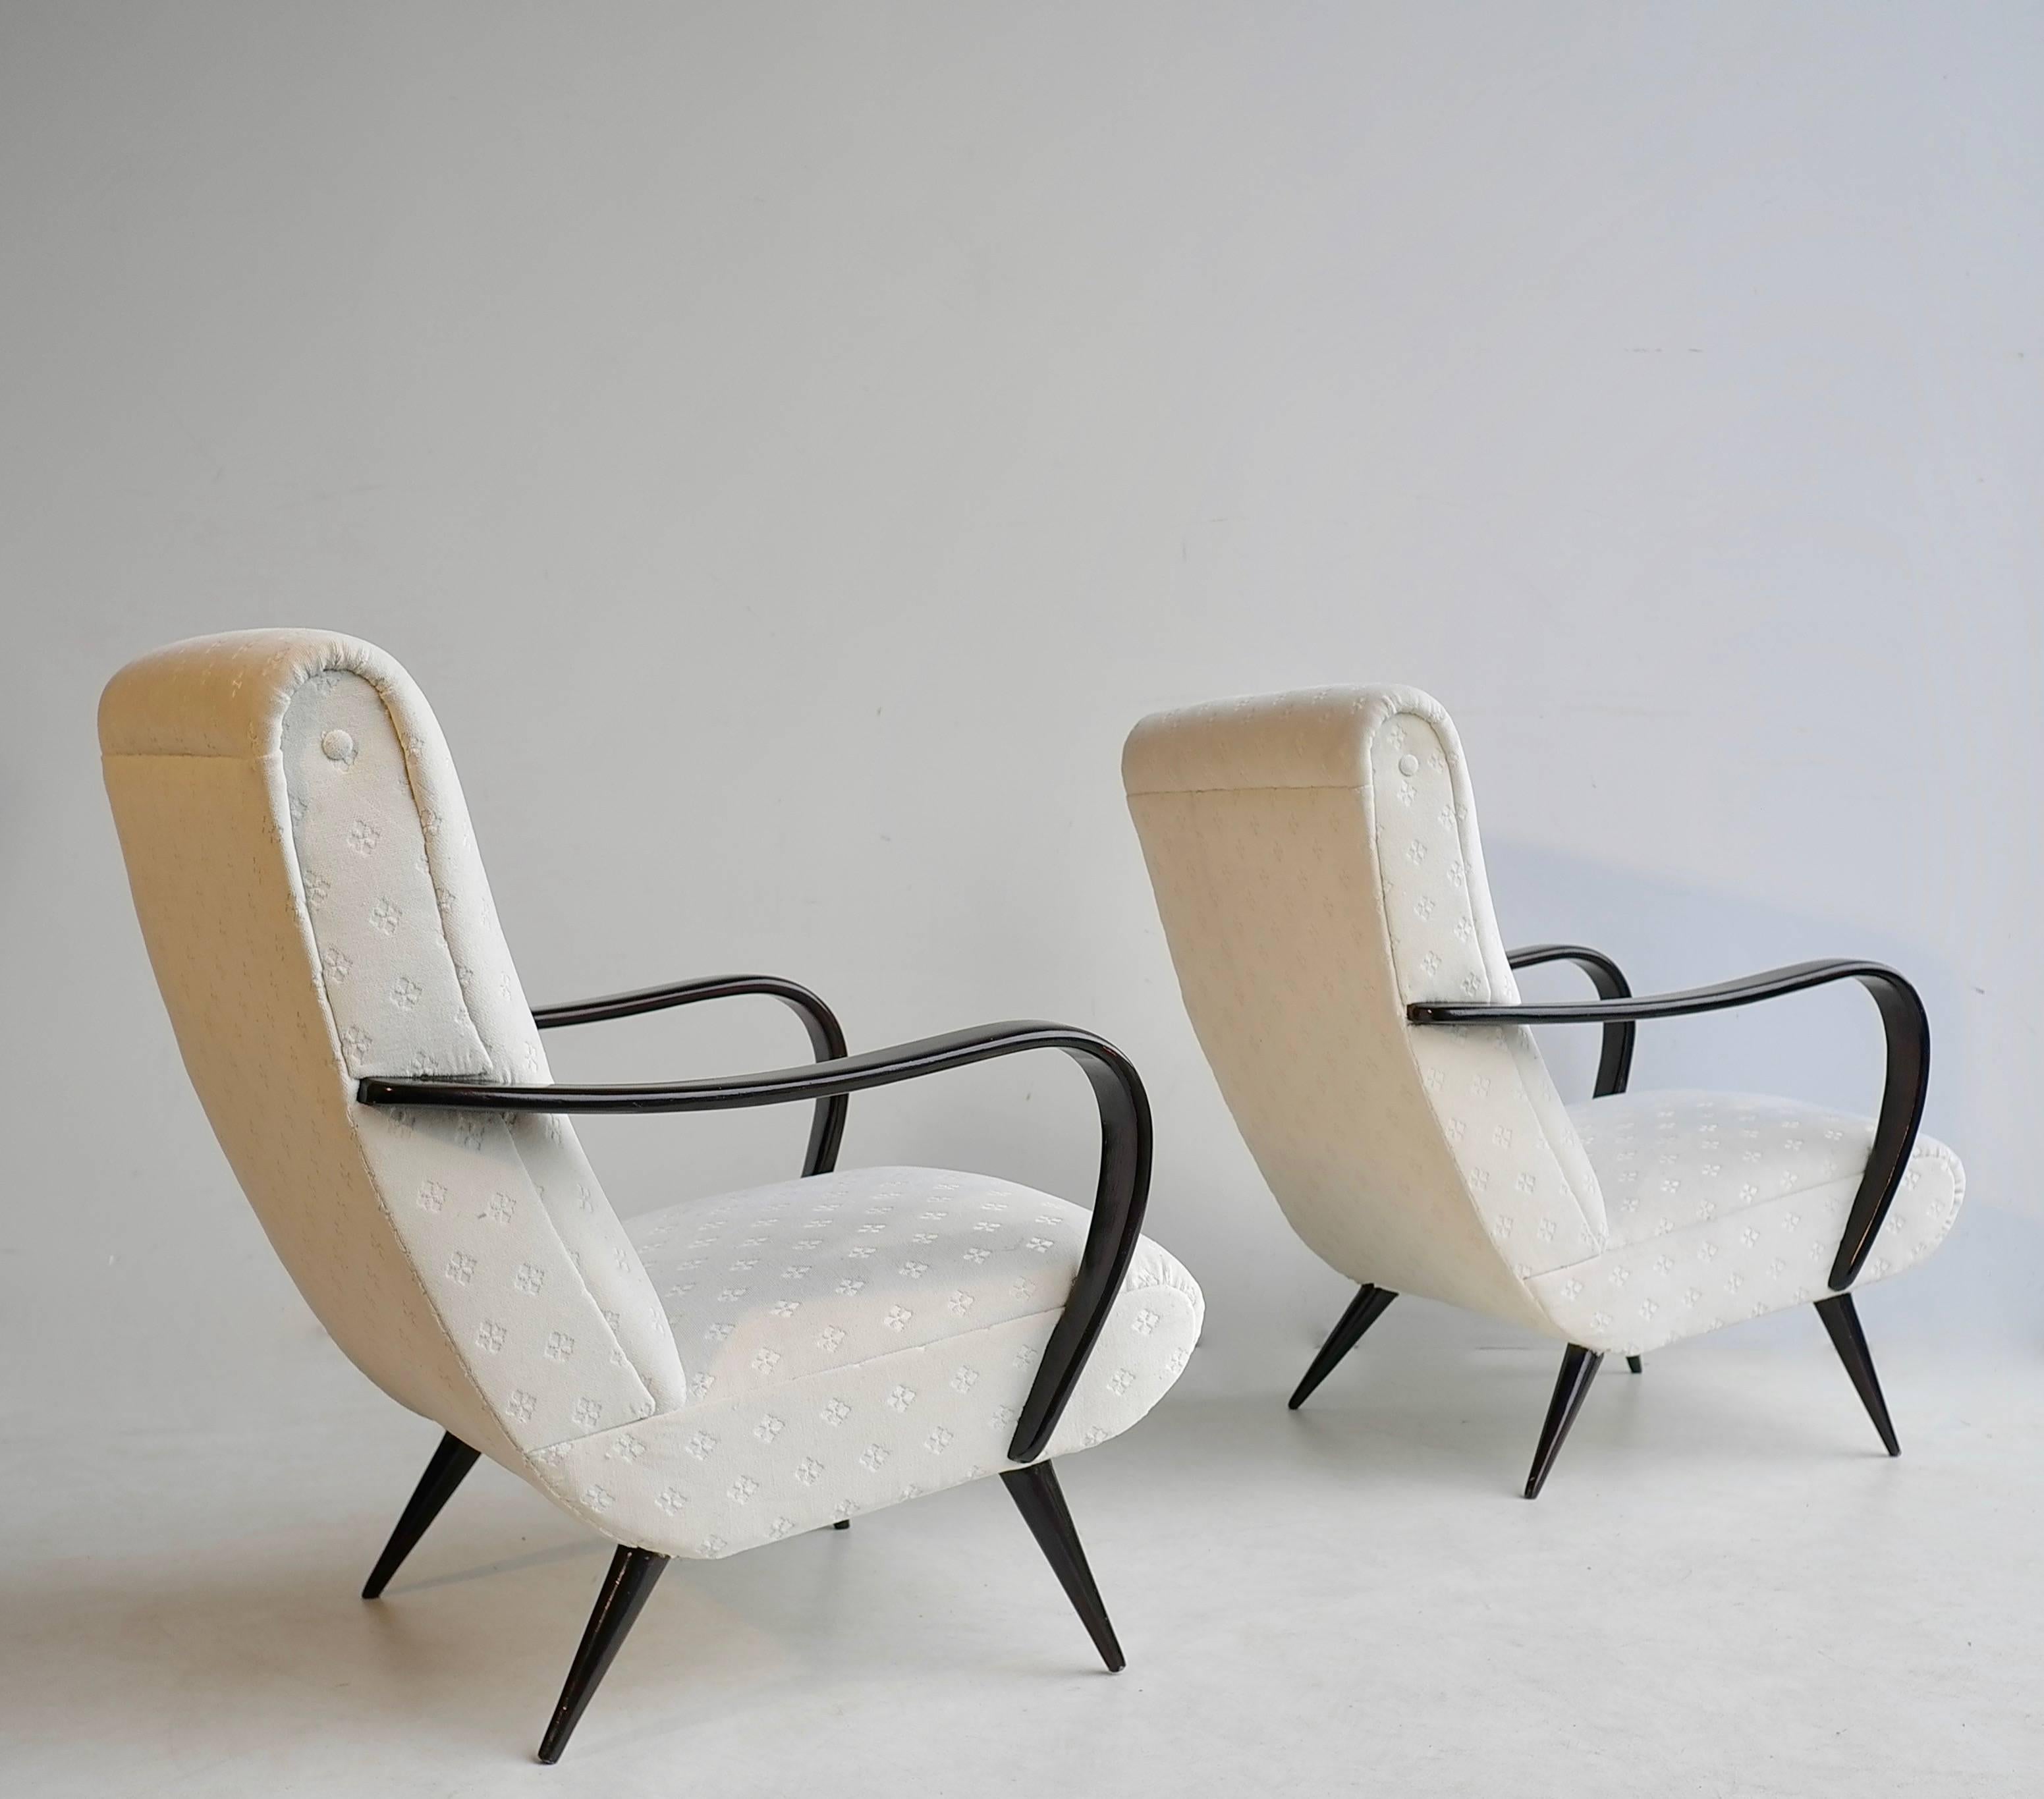 Italian Pair of Sculptural Lounge Chairs with Curved Wooden Armrests, Italy, 1950s